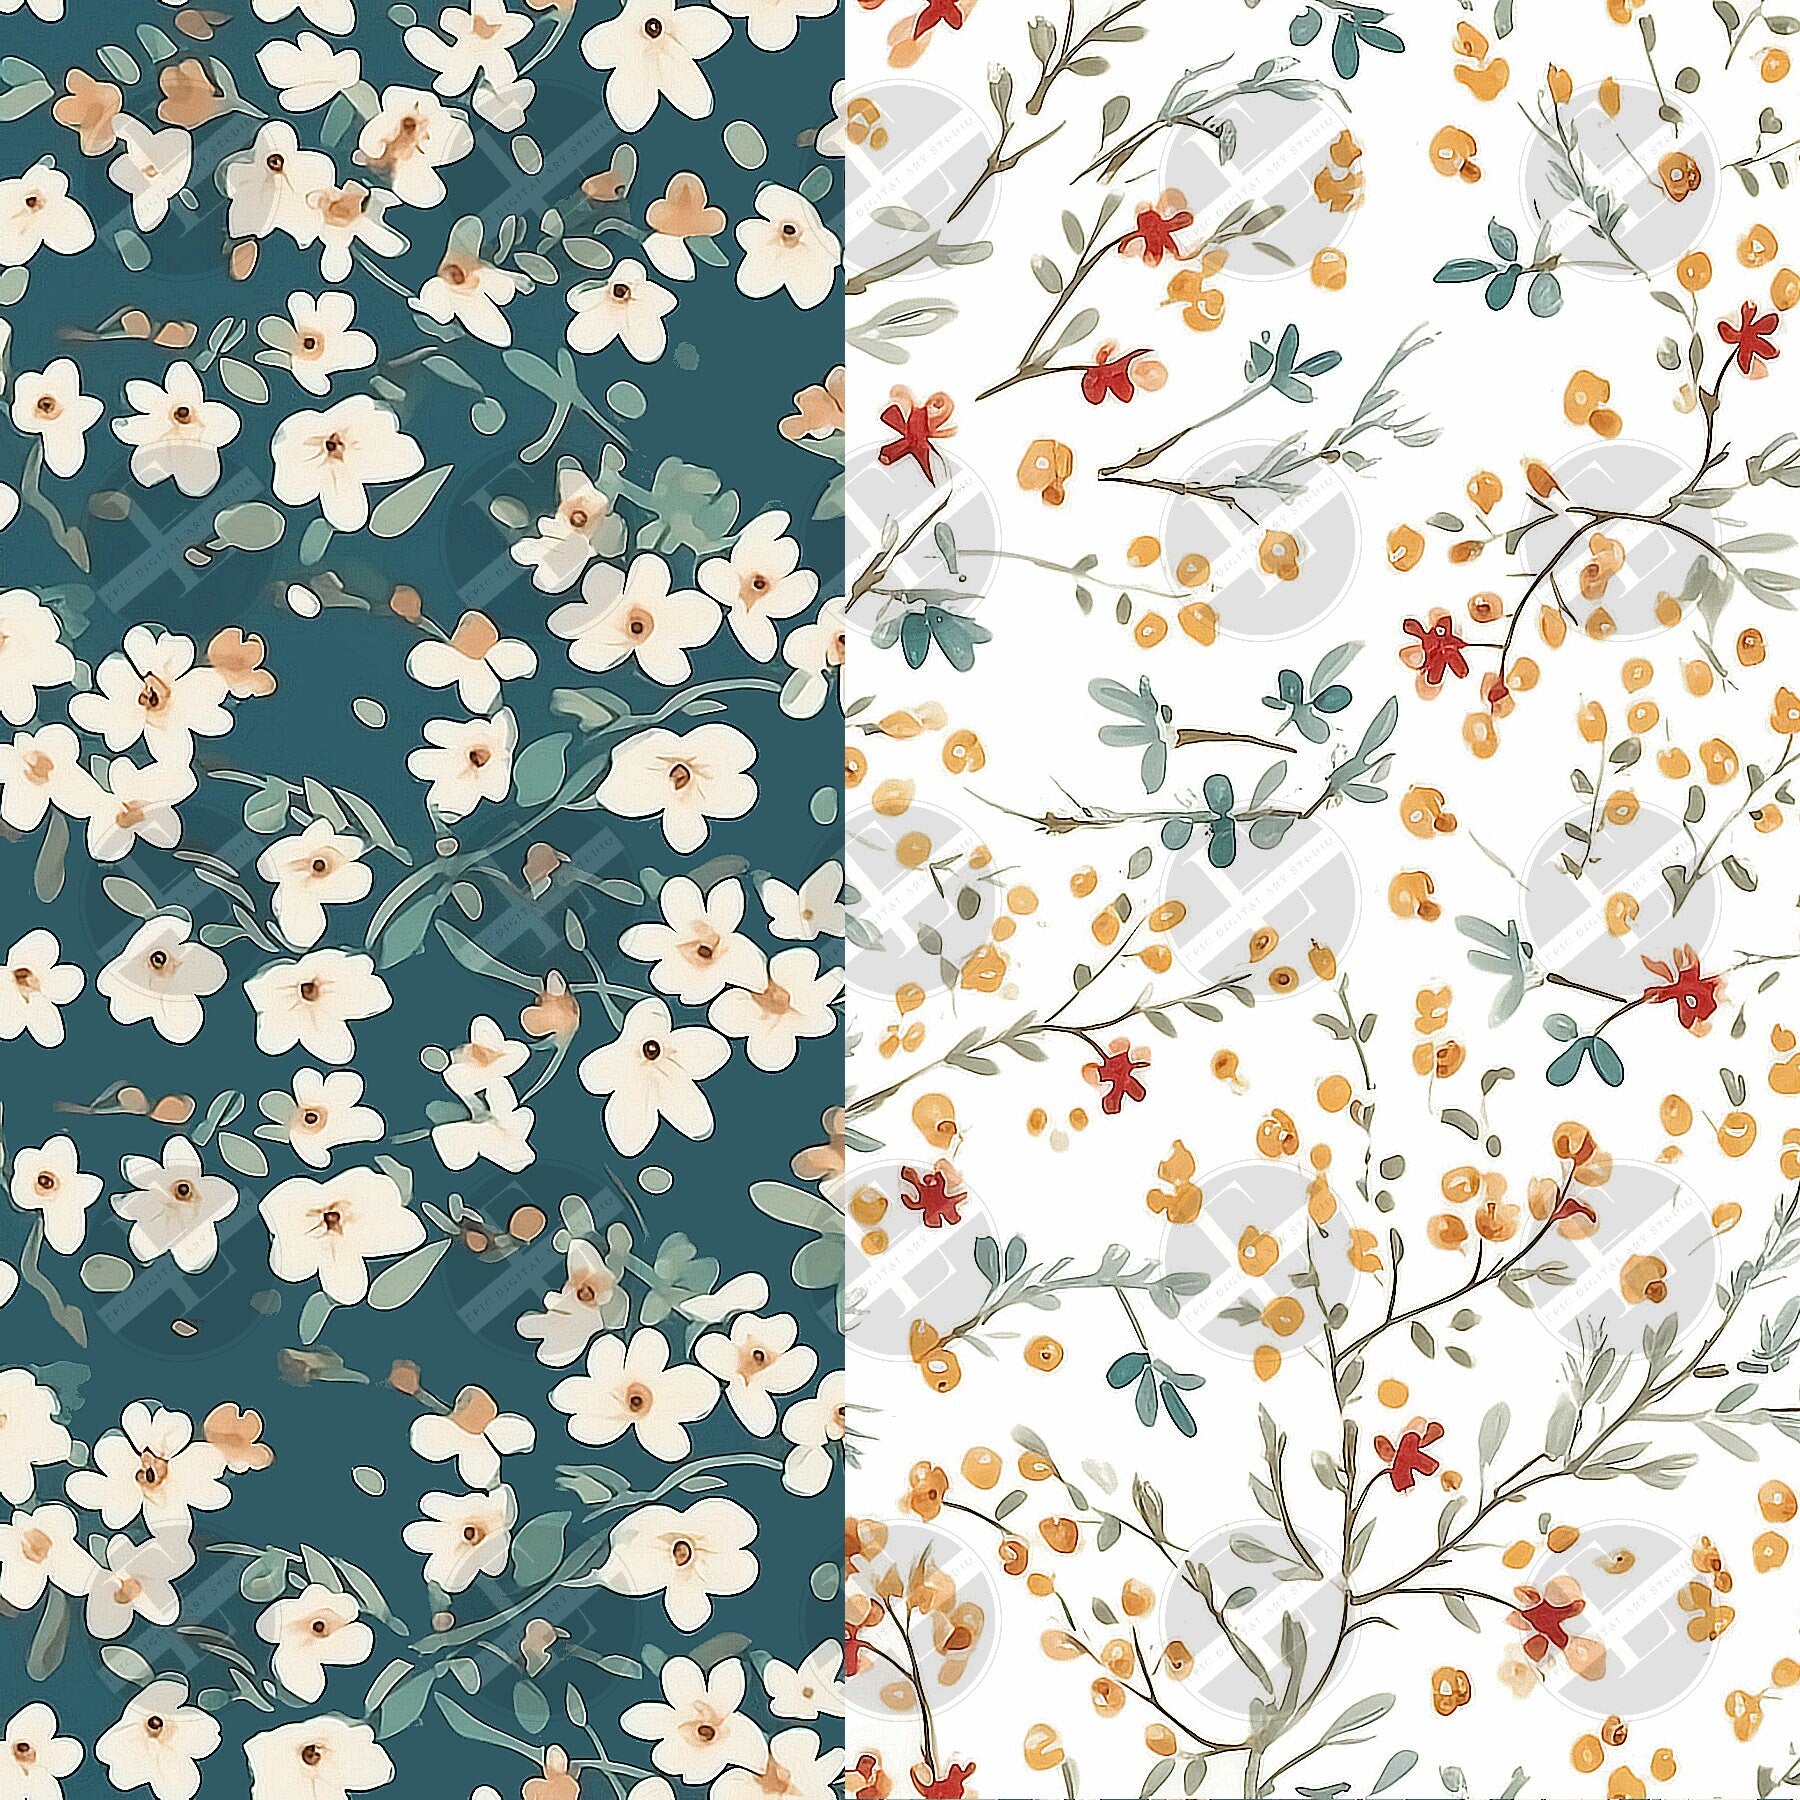 Boho Tiny Flowers Floral Seamless Patterns Digital Download PNG - Bundle of 12 - Tiny Flowers Floral Patterns - Commercial & Personal Use